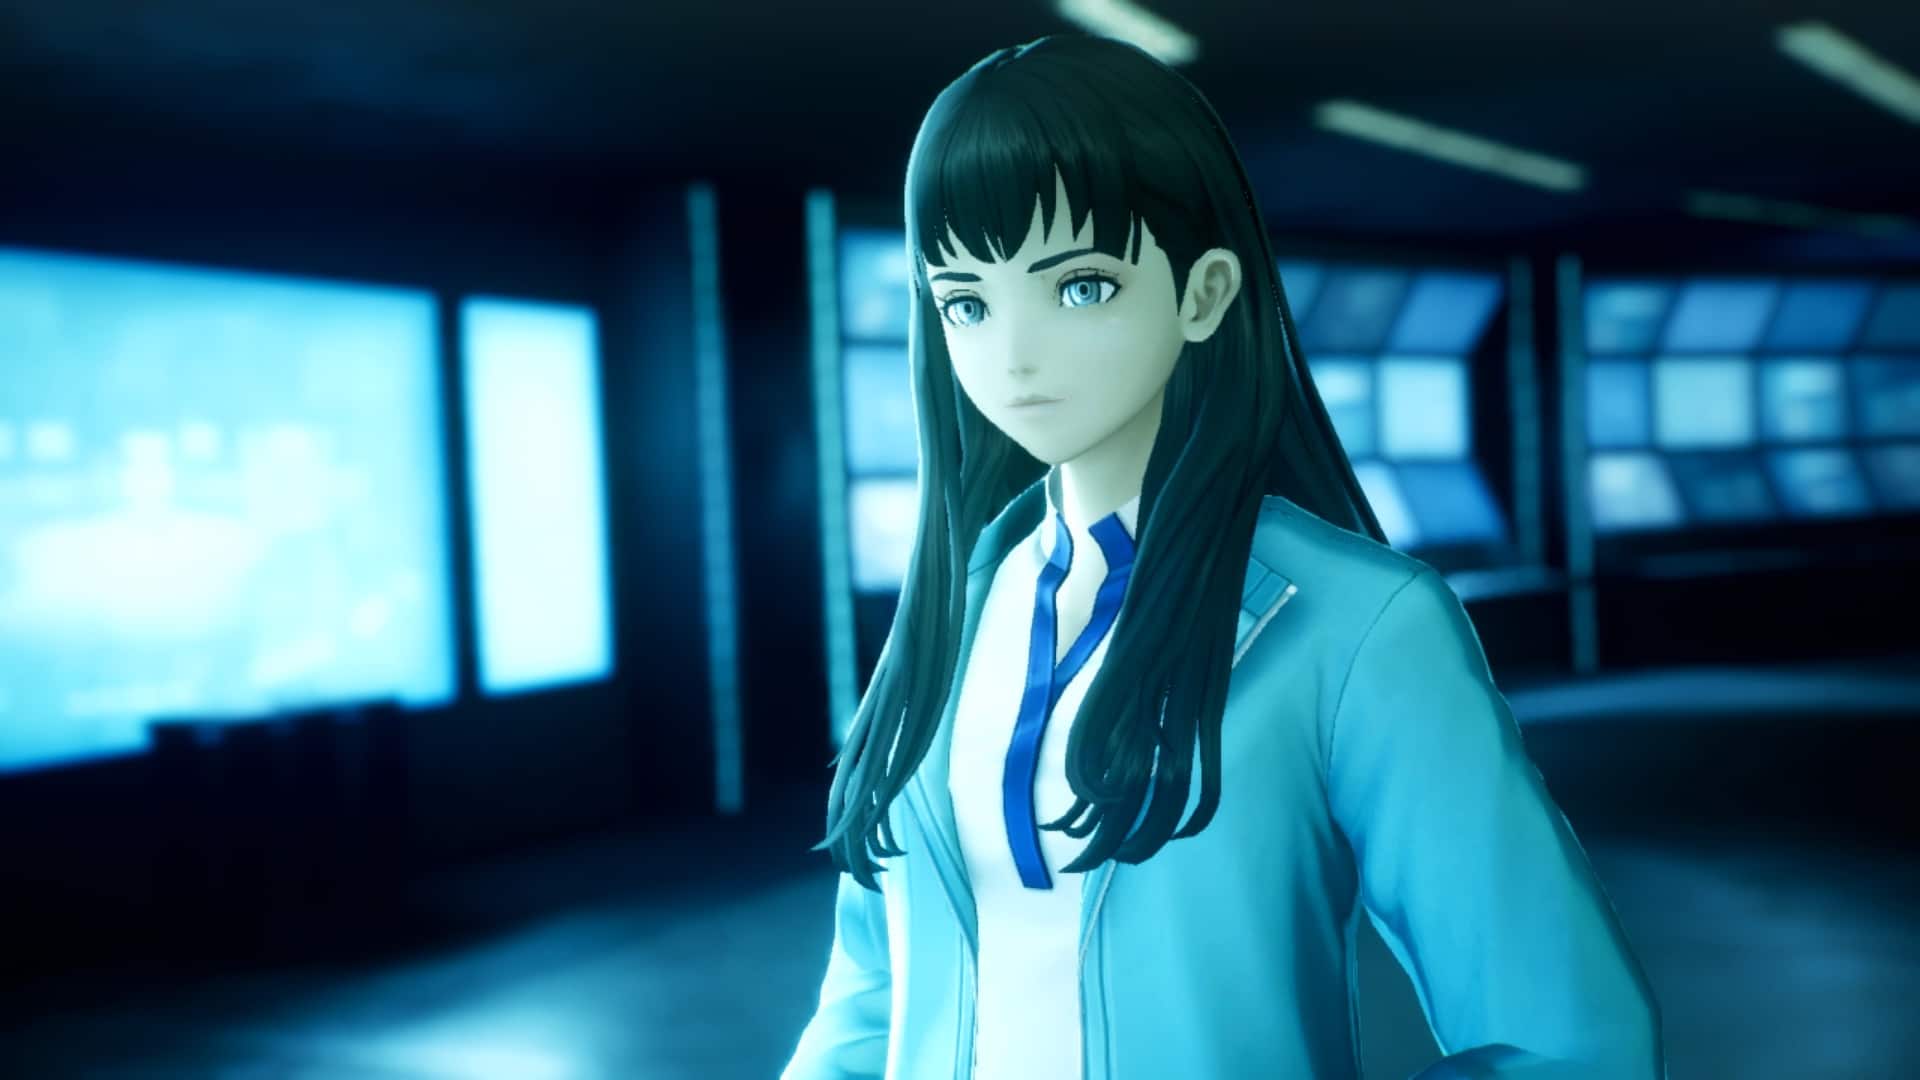 Shin Megami Tensei V Director Yearning To Revive Past Hits & Create Brand New Titles For Expanded Series Reach